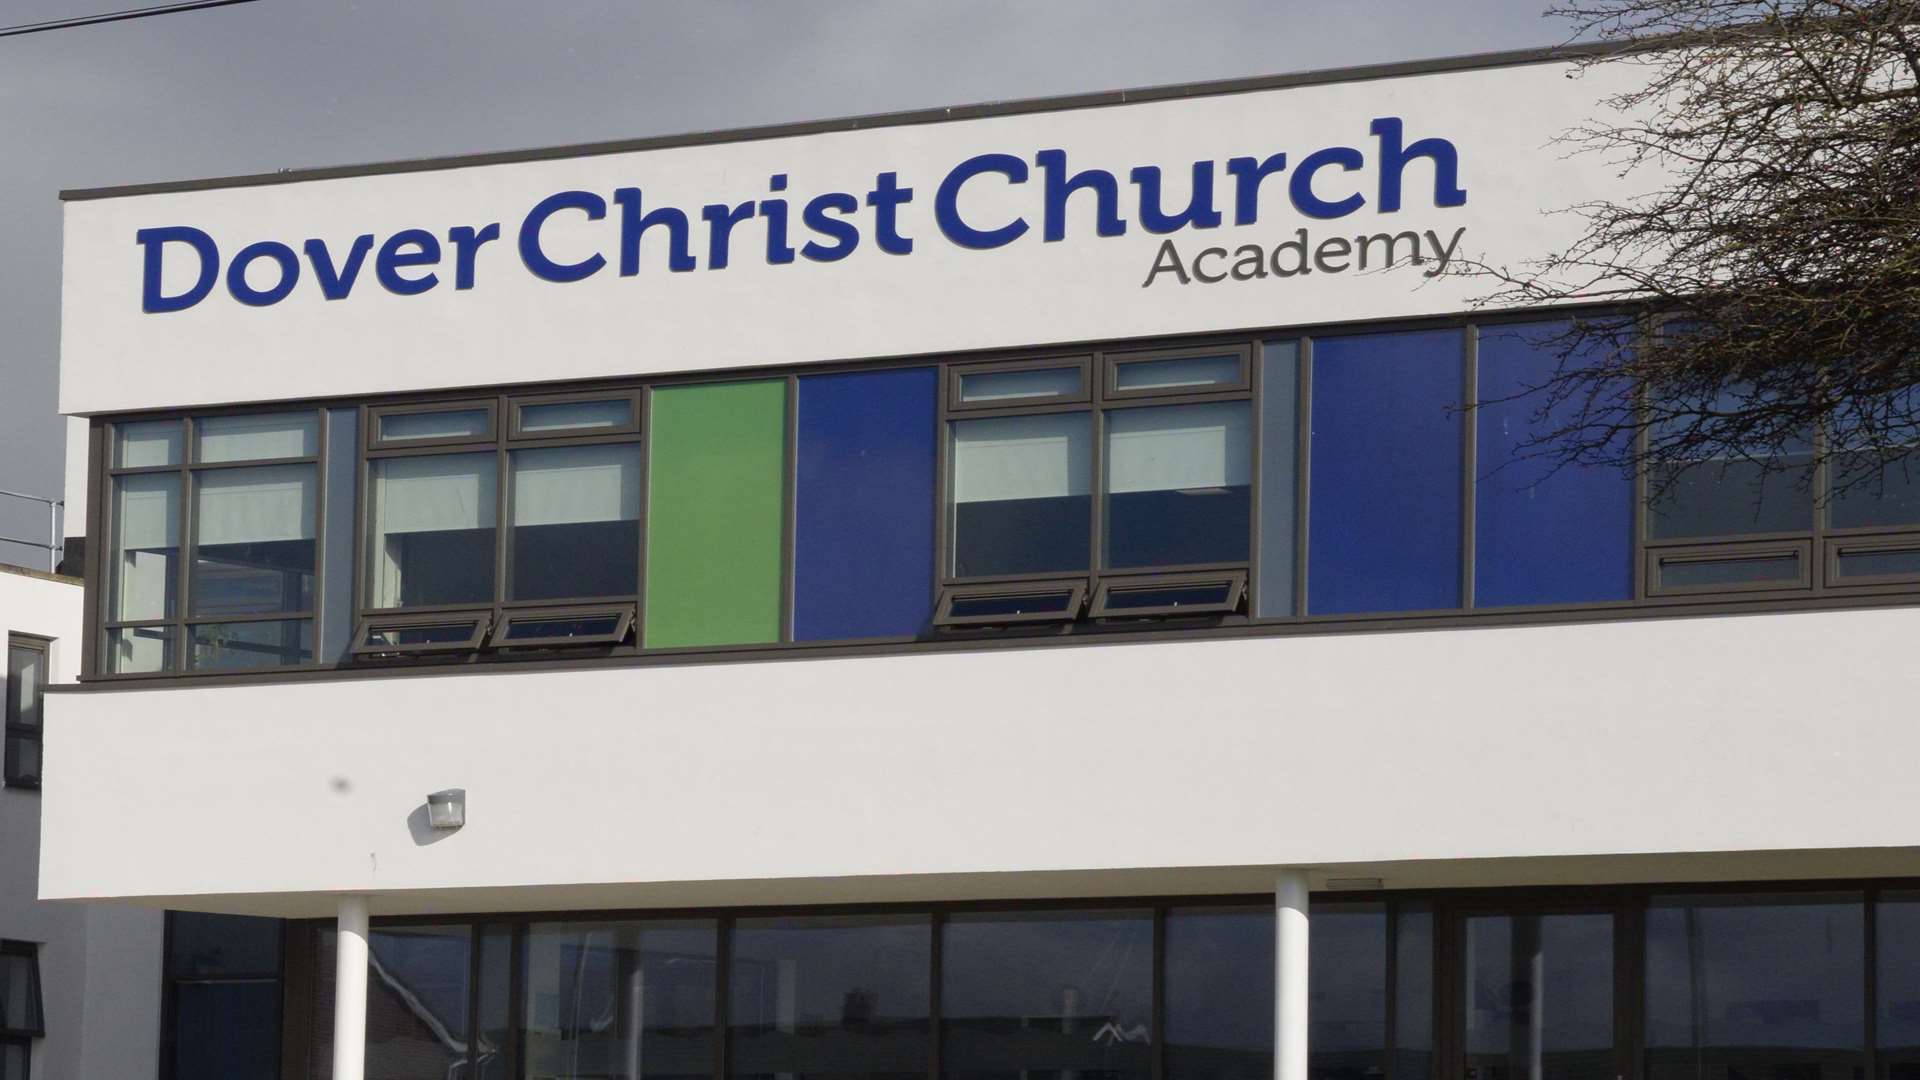 The newly refurbished and extended Christ Church Academy